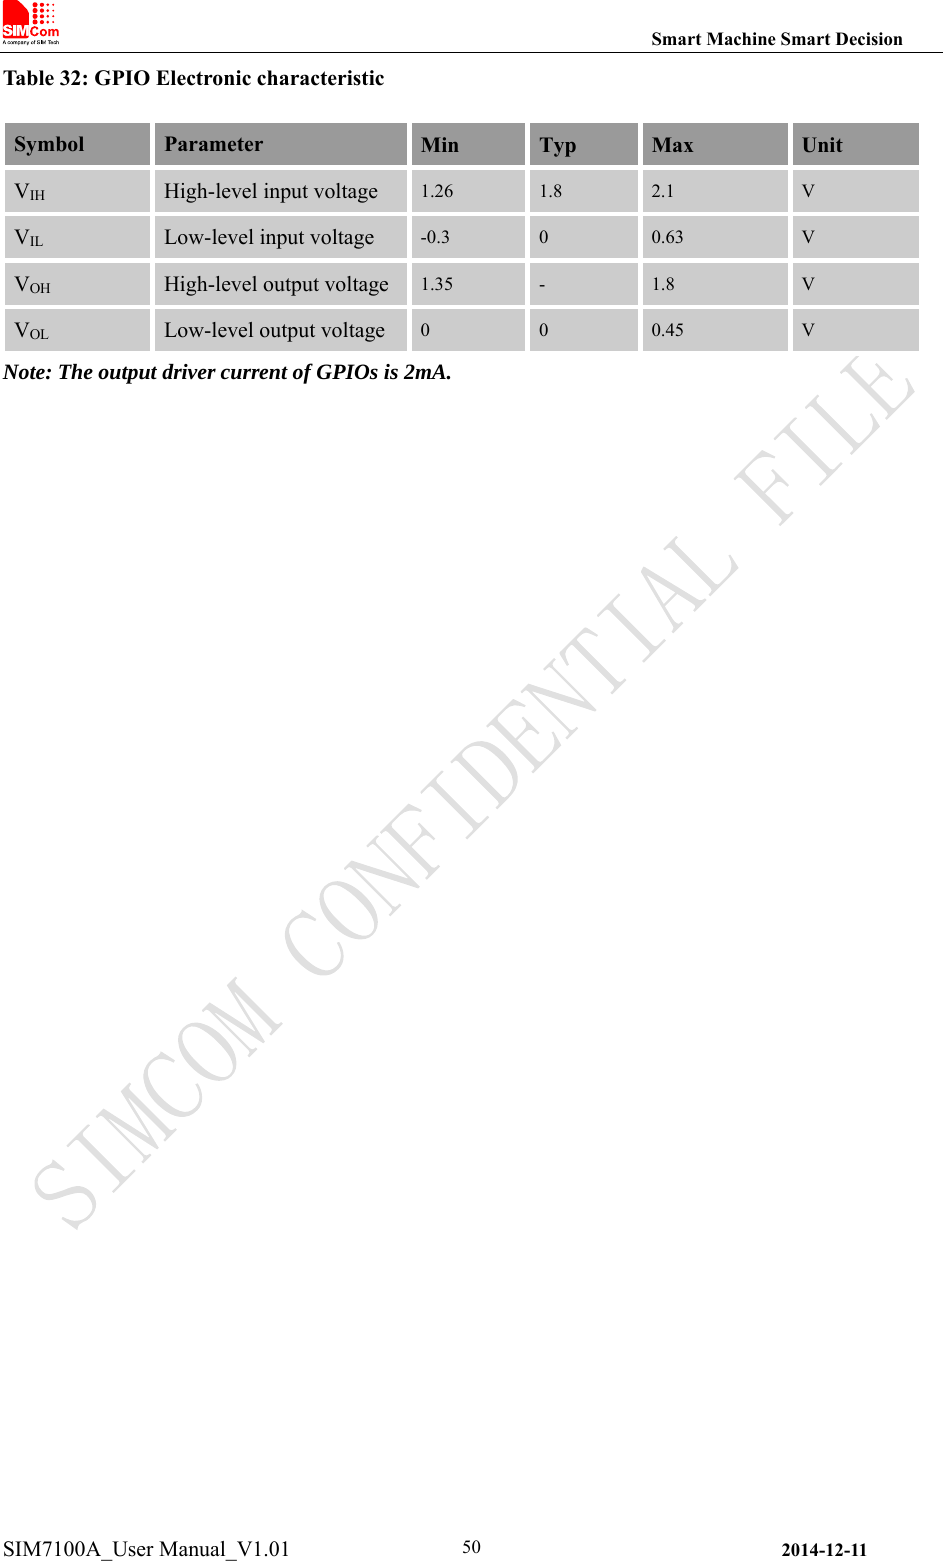                                                                Smart Machine Smart Decision SIM7100A_User Manual_V1.01                2014-12-11 50Table 32: GPIO Electronic characteristic   Symbol  Parameter  Min  Typ  Max  Unit VIH High-level input voltage  1.26  1.8  2.1  V VIL Low-level input voltage  -0.3  0  0.63  V VOH High-level output voltage 1.35  -  1.8  V VOL Low-level output voltage  0  0  0.45  V Note: The output driver current of GPIOs is 2mA. 